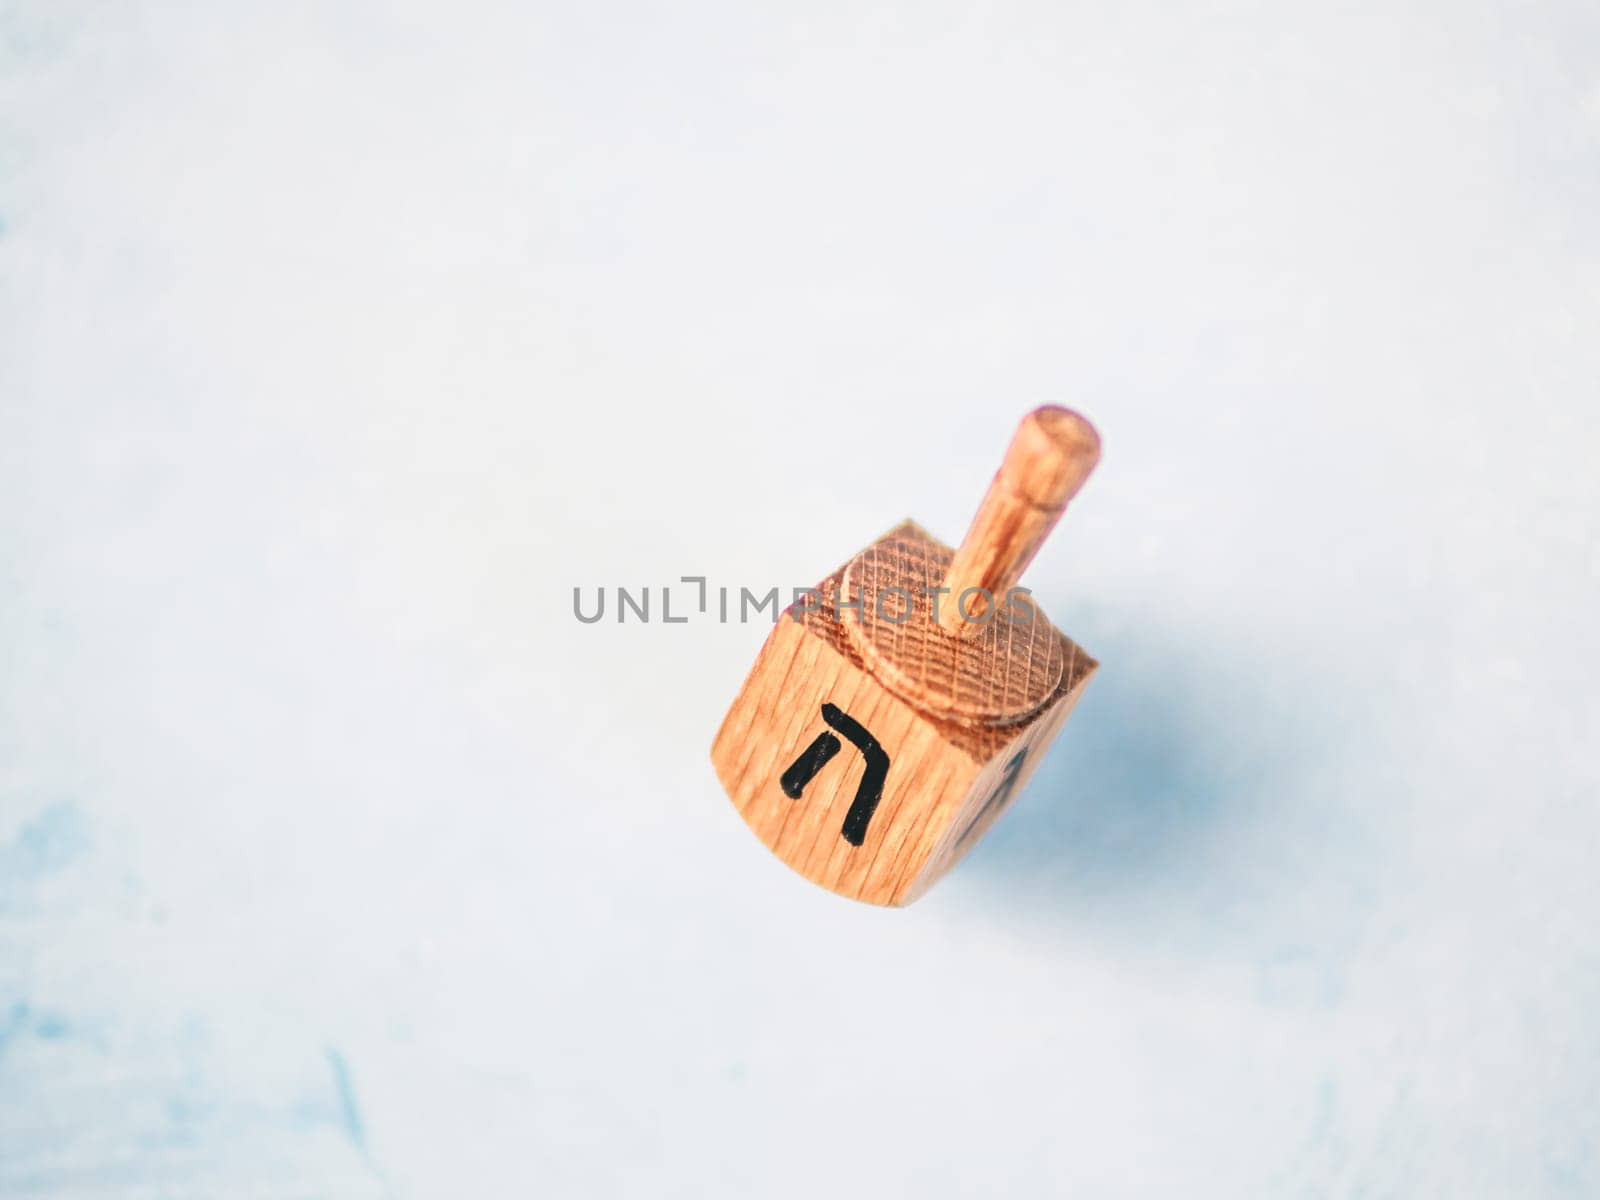 Jewish holiday Hanukkah concept and background. Hanukkah traditional spinnig dreidl or dredel on blue background. Copy space for text. Top view or flat lay.